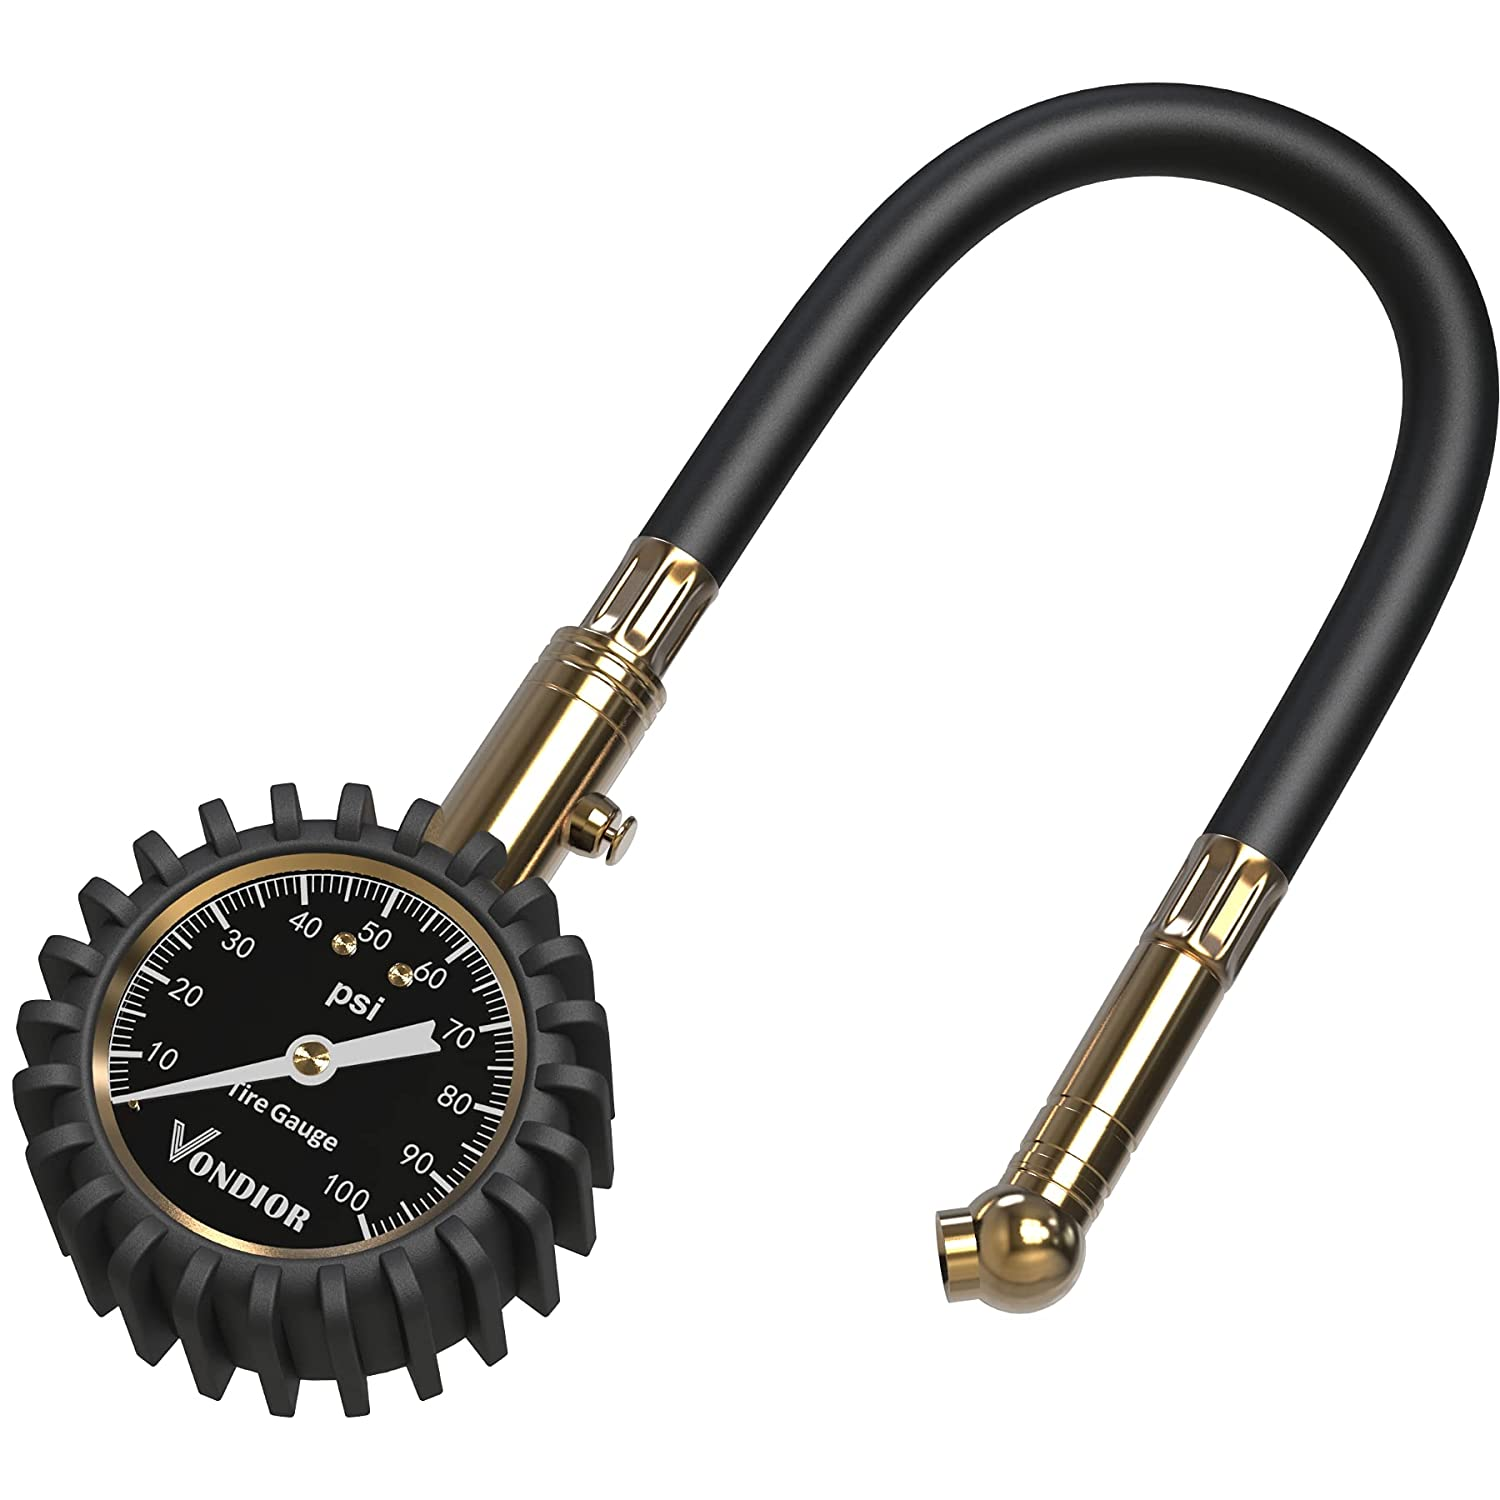 A pressure gauge like this is not essential to have in your mountain bike tool kit but it can be useful to prolong the lifespan of your tires.